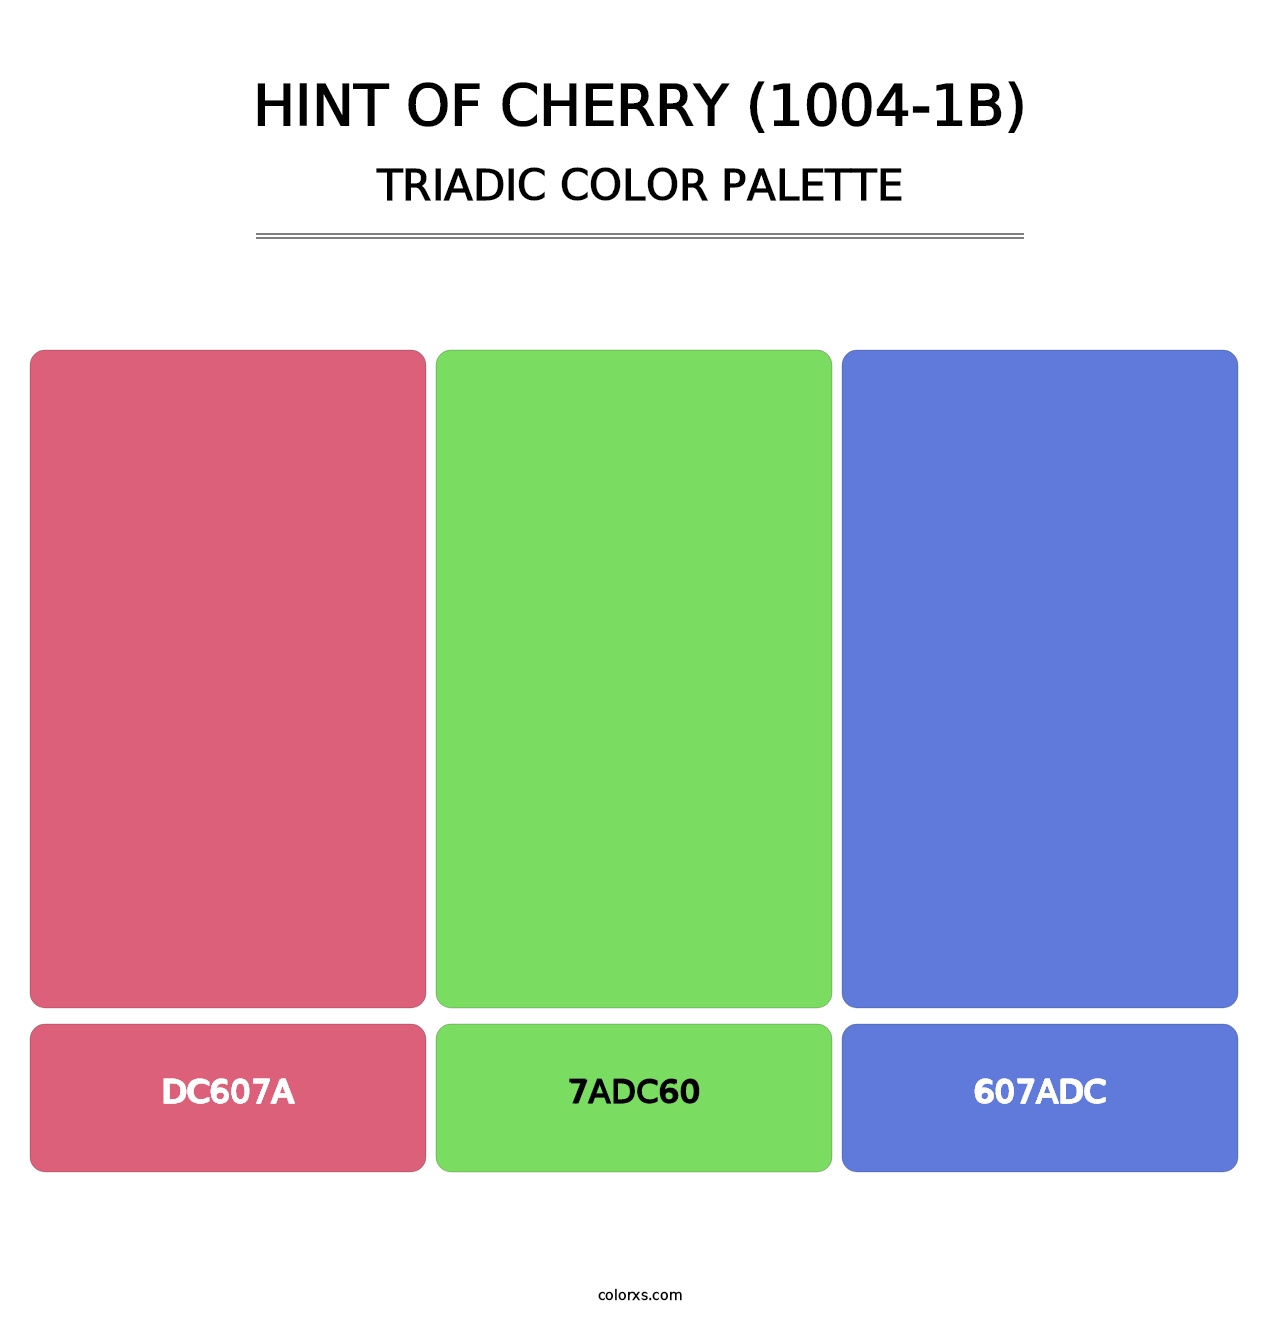 Hint of Cherry (1004-1B) - Triadic Color Palette